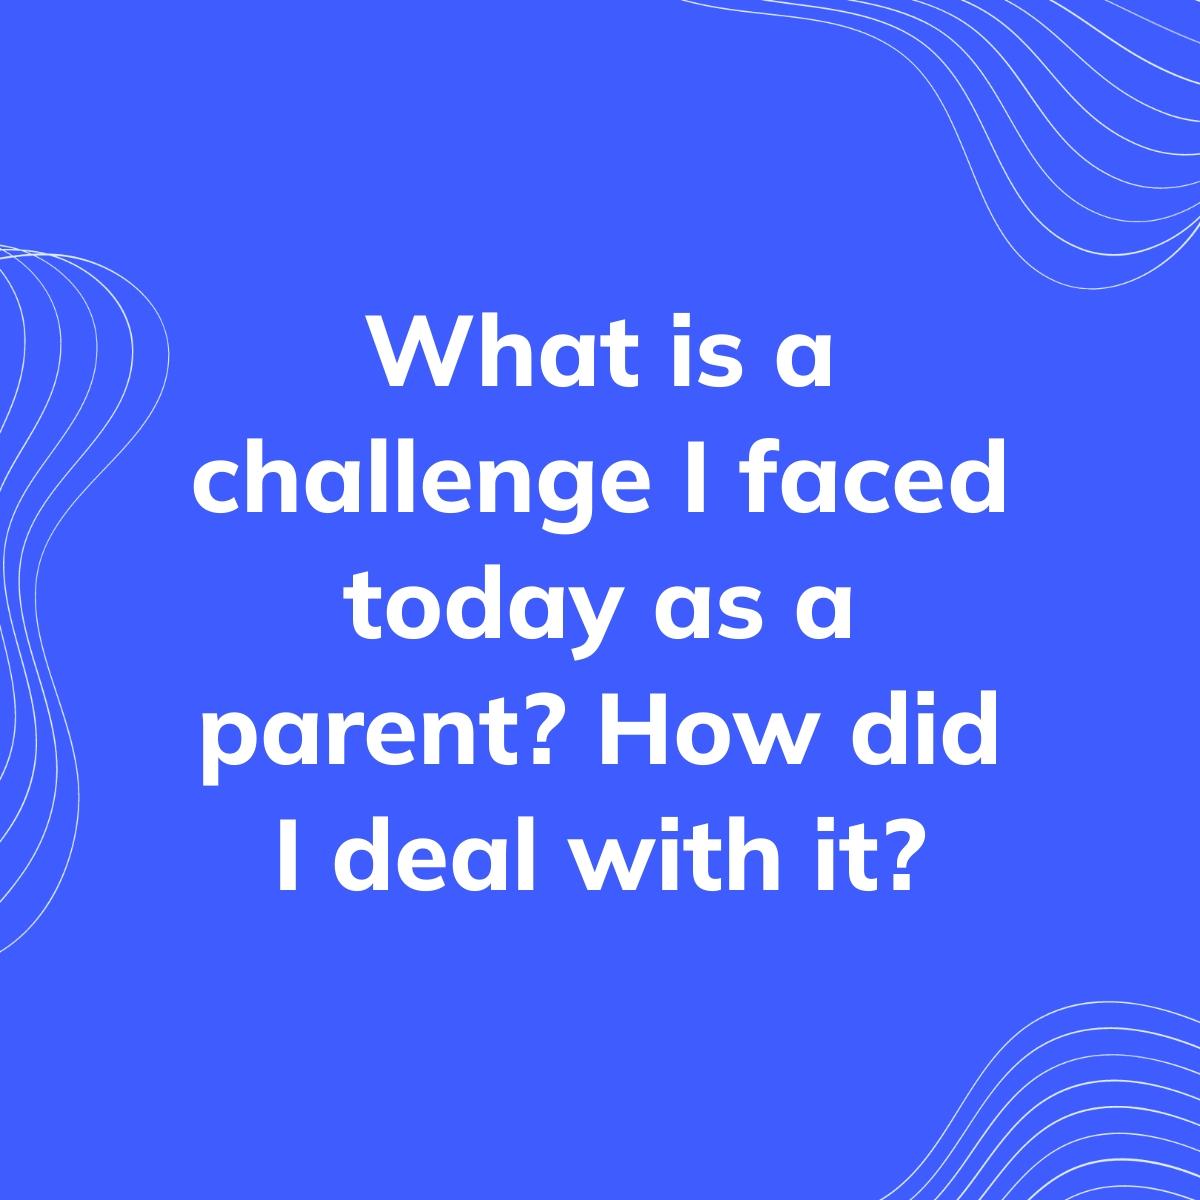 Journal Prompt: What is a challenge I faced today as a parent? How did I deal with it?